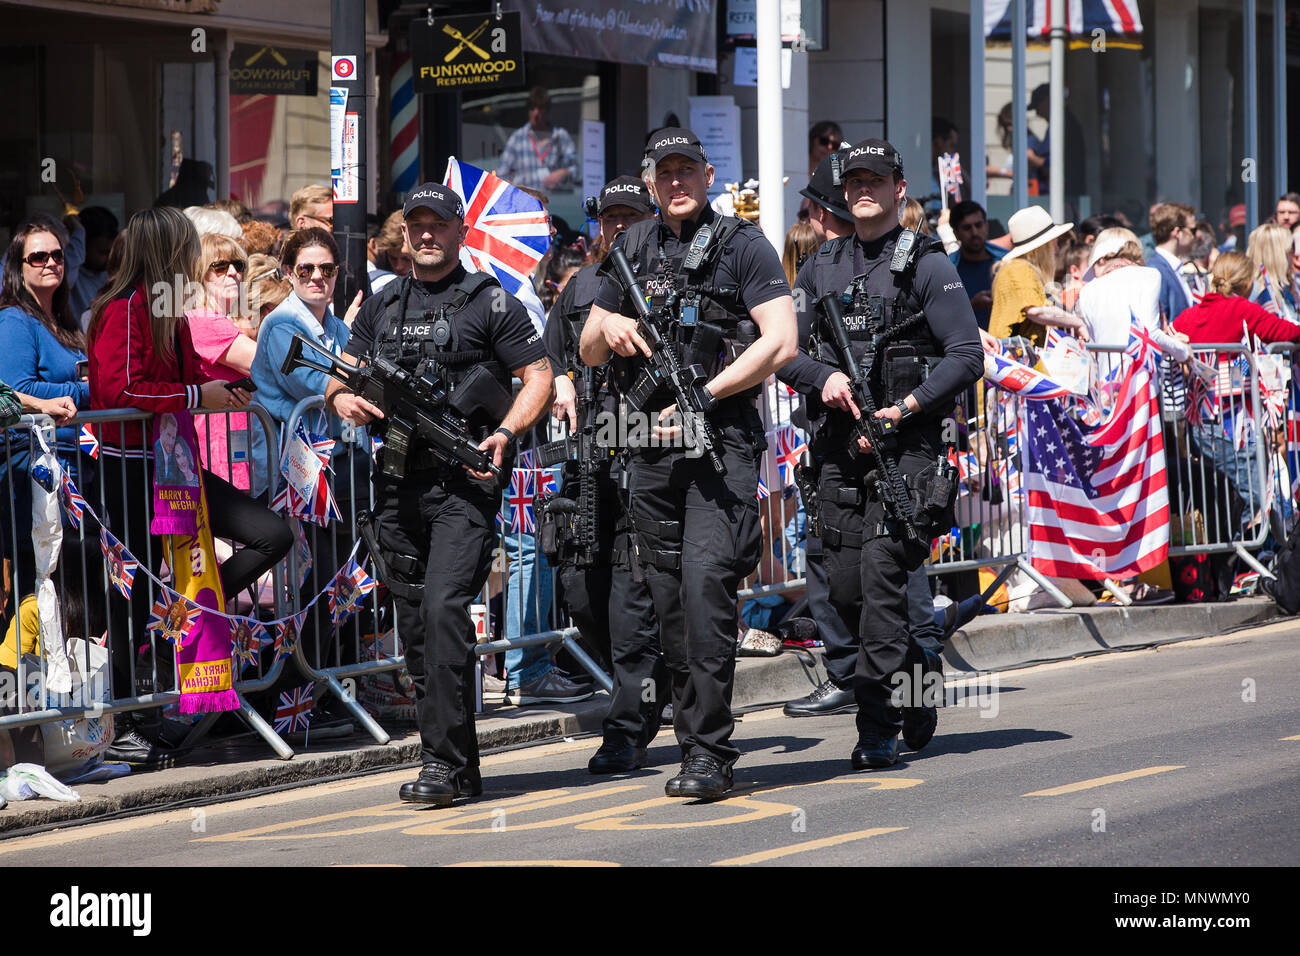 Policing the Royal Wedding of Prince Harry to Meghan Markle took many forms from the traditional Bobby on the beat and Mounted Officers to the Heavily Armed Firearms officers carrying Automatic weapons who were very much in evidence. Credit: David Betteridge/Alamy Live News Stock Photo